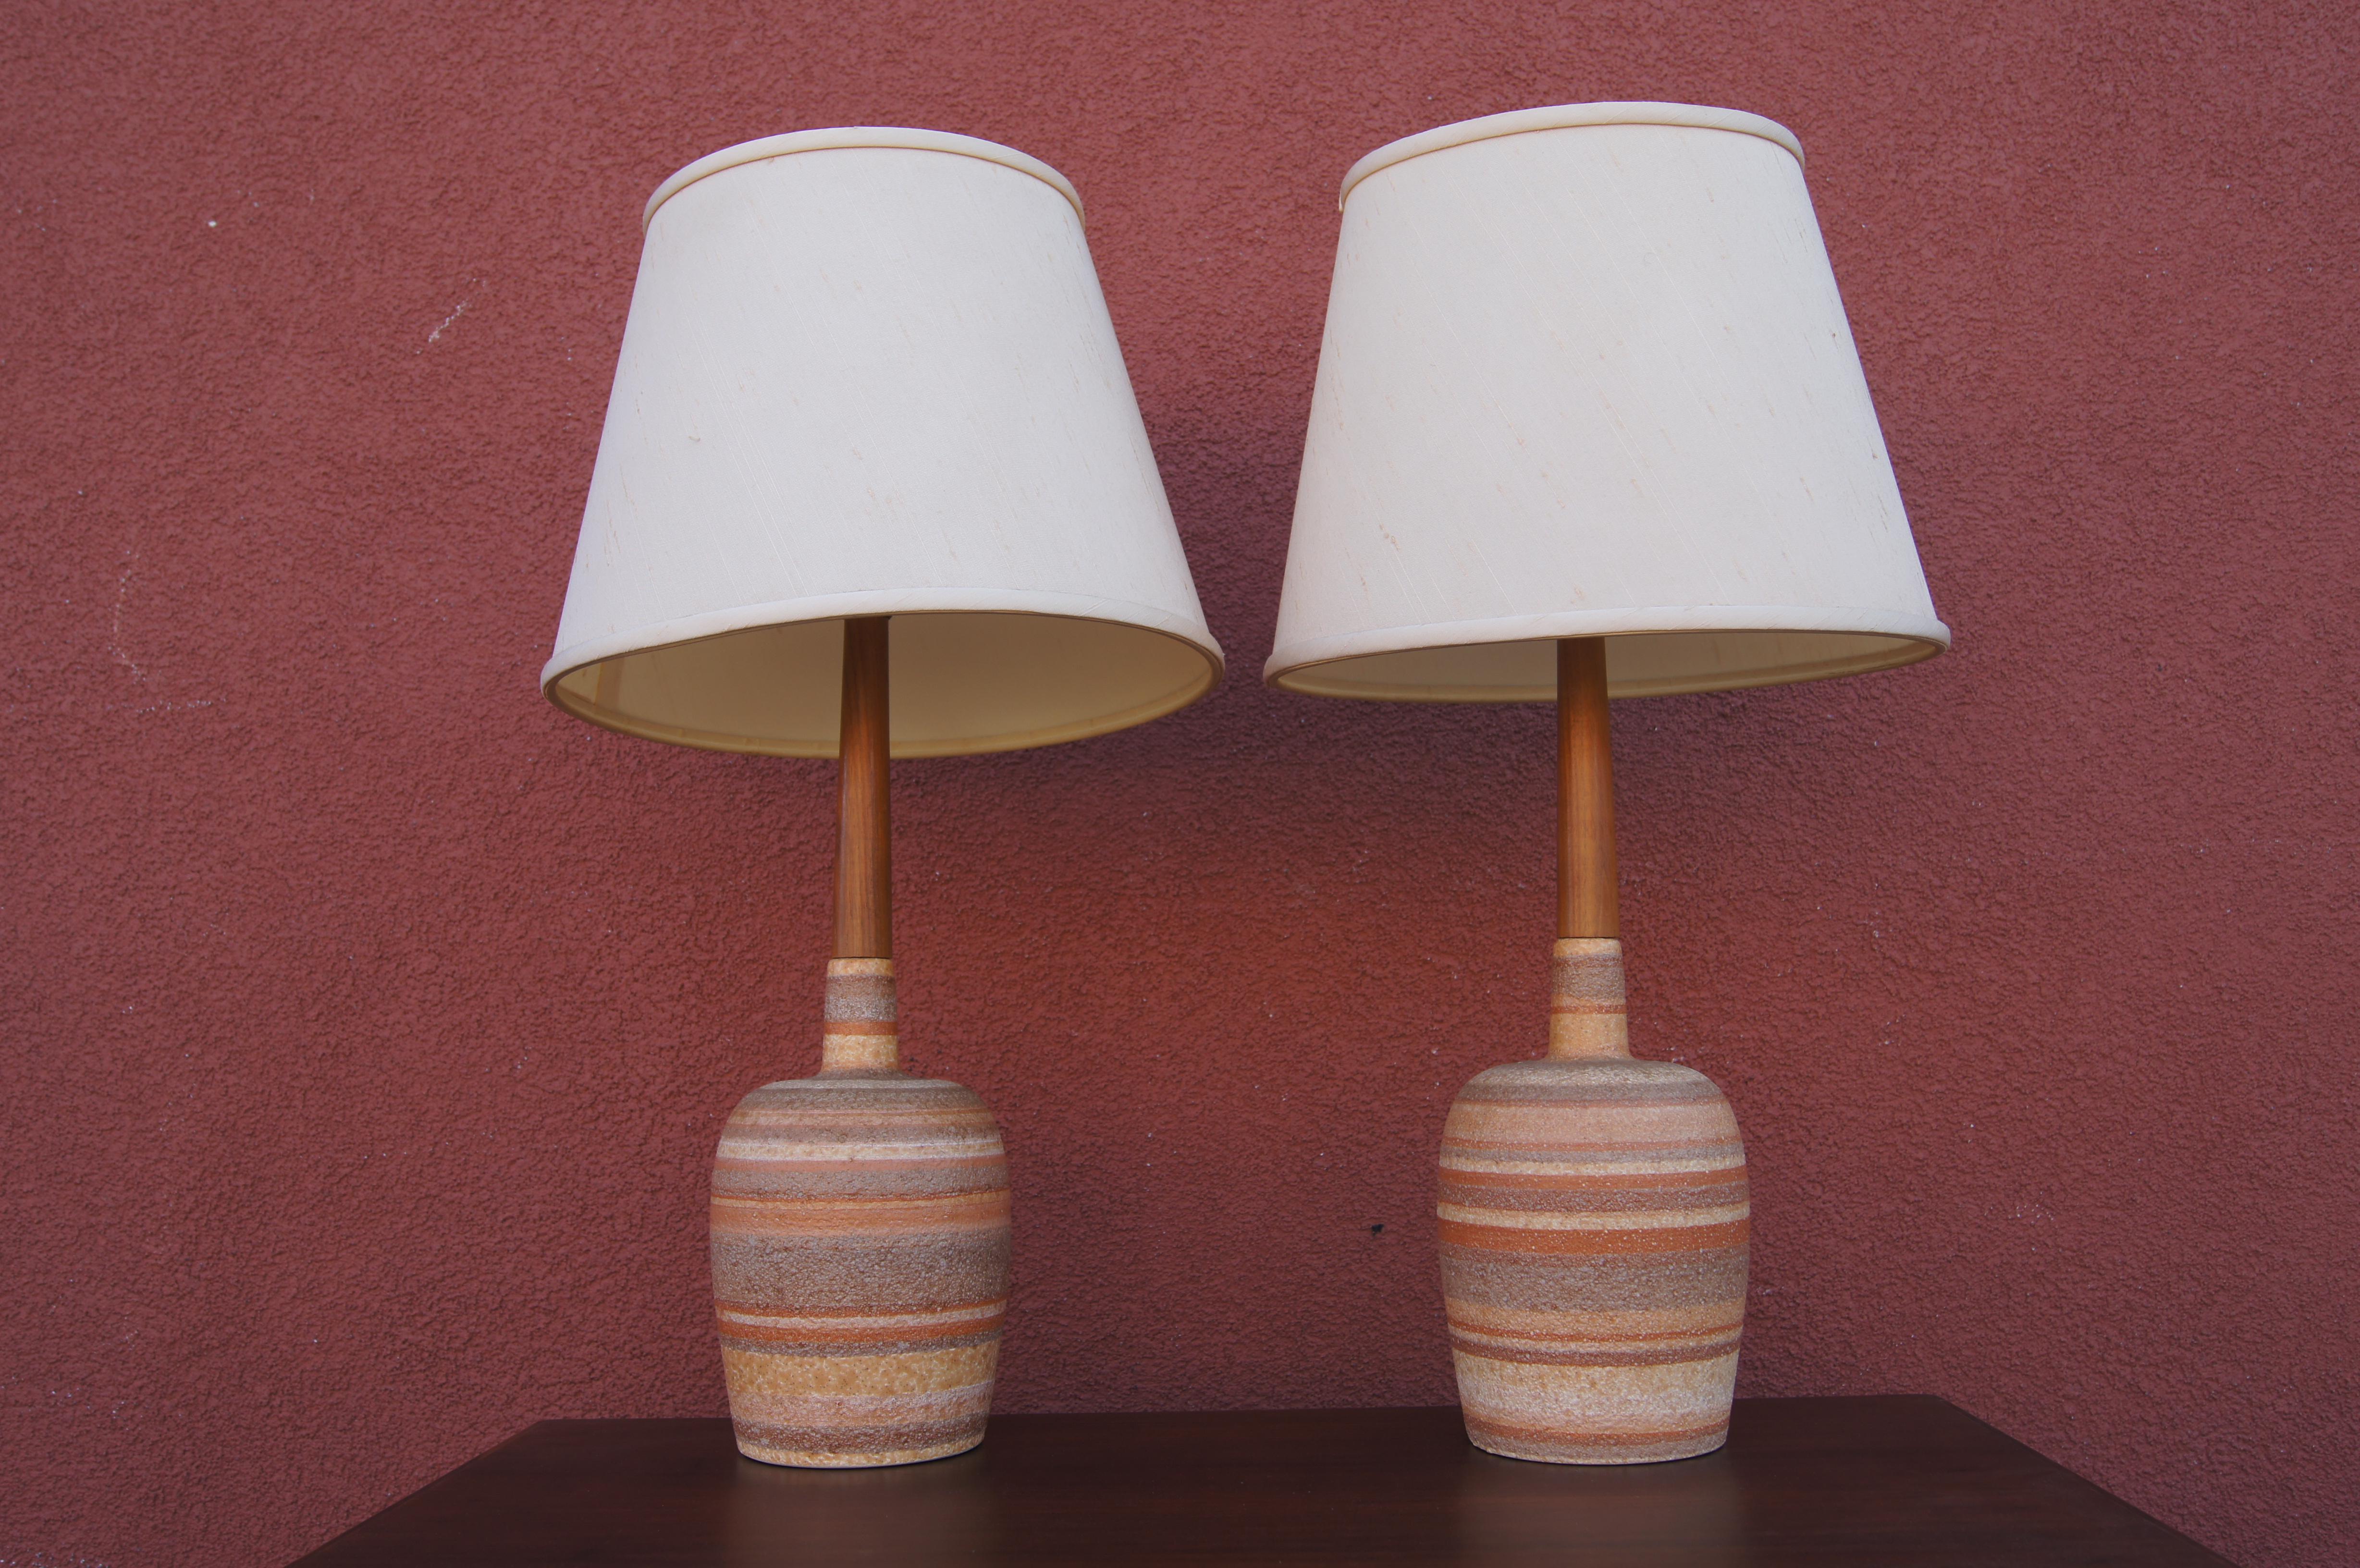 This sweet pair of midcentury Danish tables lamps features bases of unglazed striated ceramic from which rise narrow columns of teak to support the socket.

Measurement below is to the top of finial. Shades included.